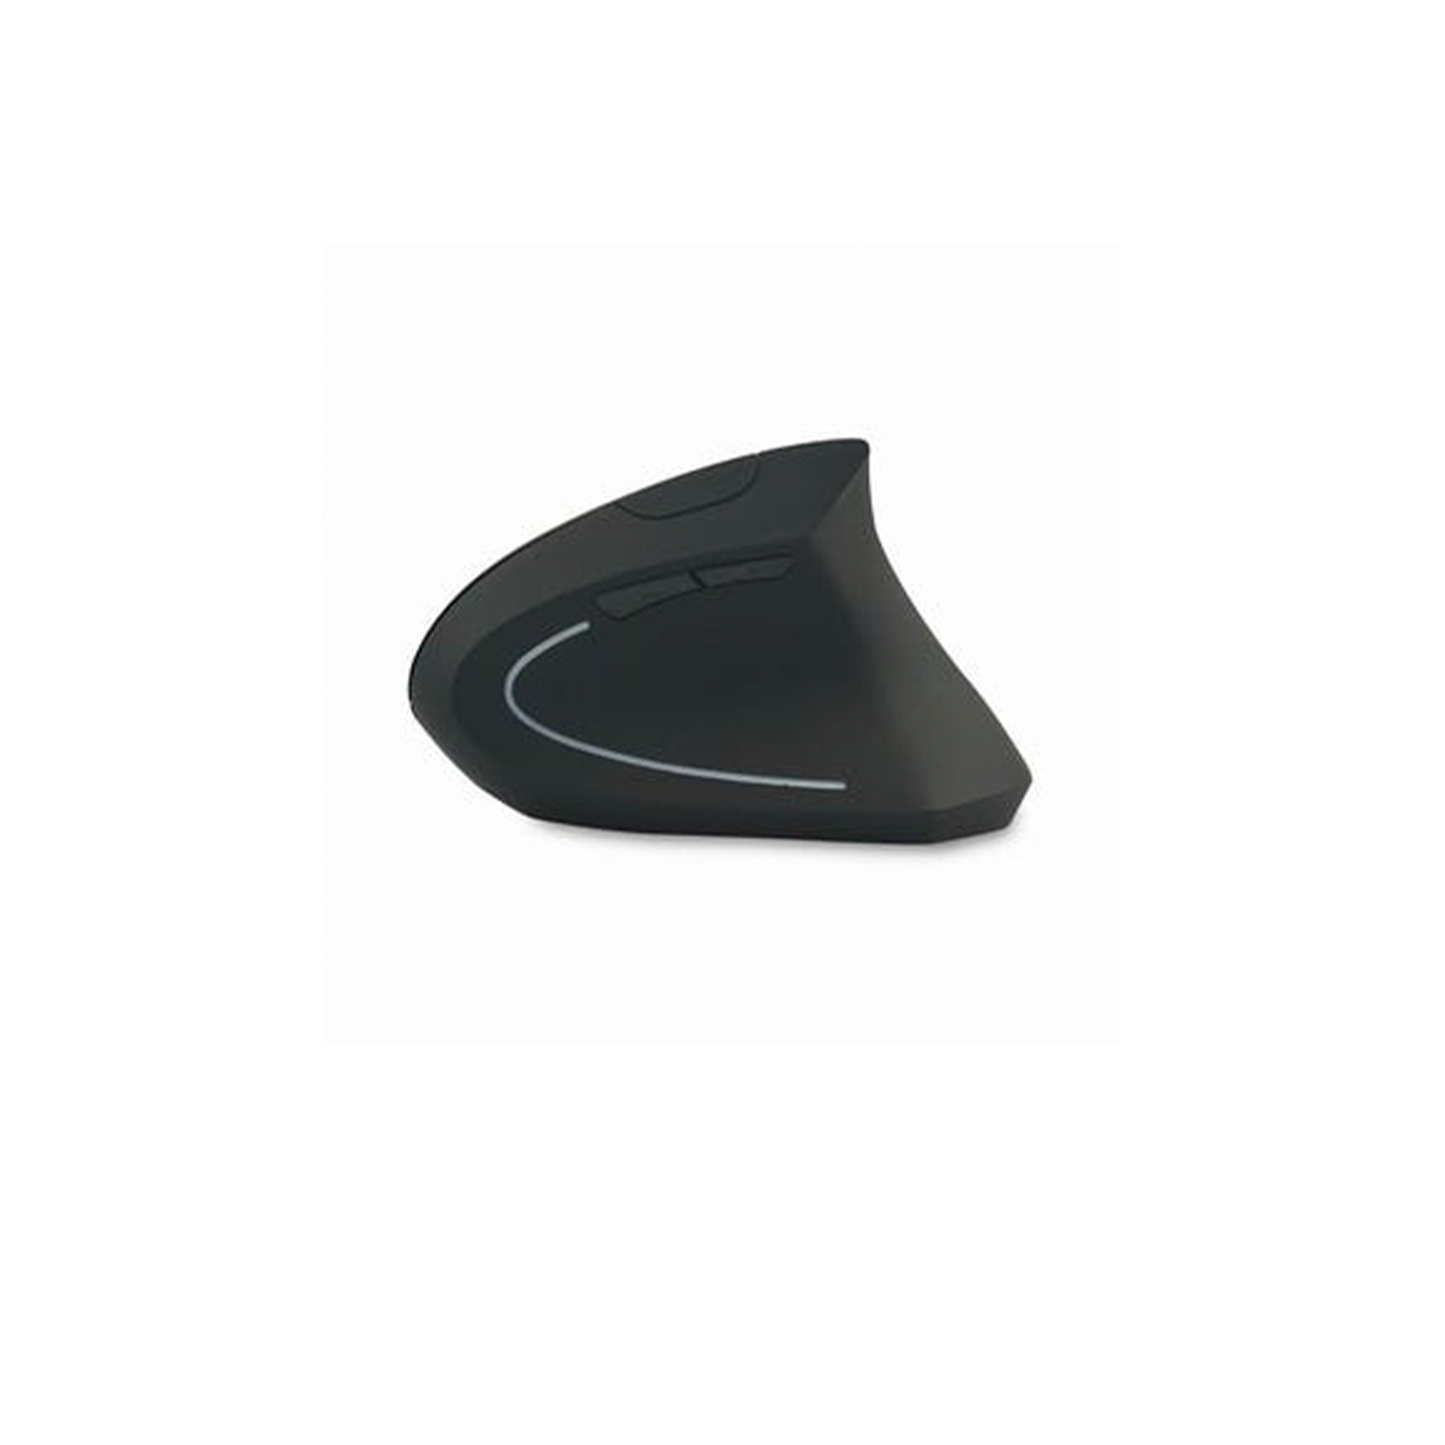 Acer Vertical Ergonomic Wireless Mouse